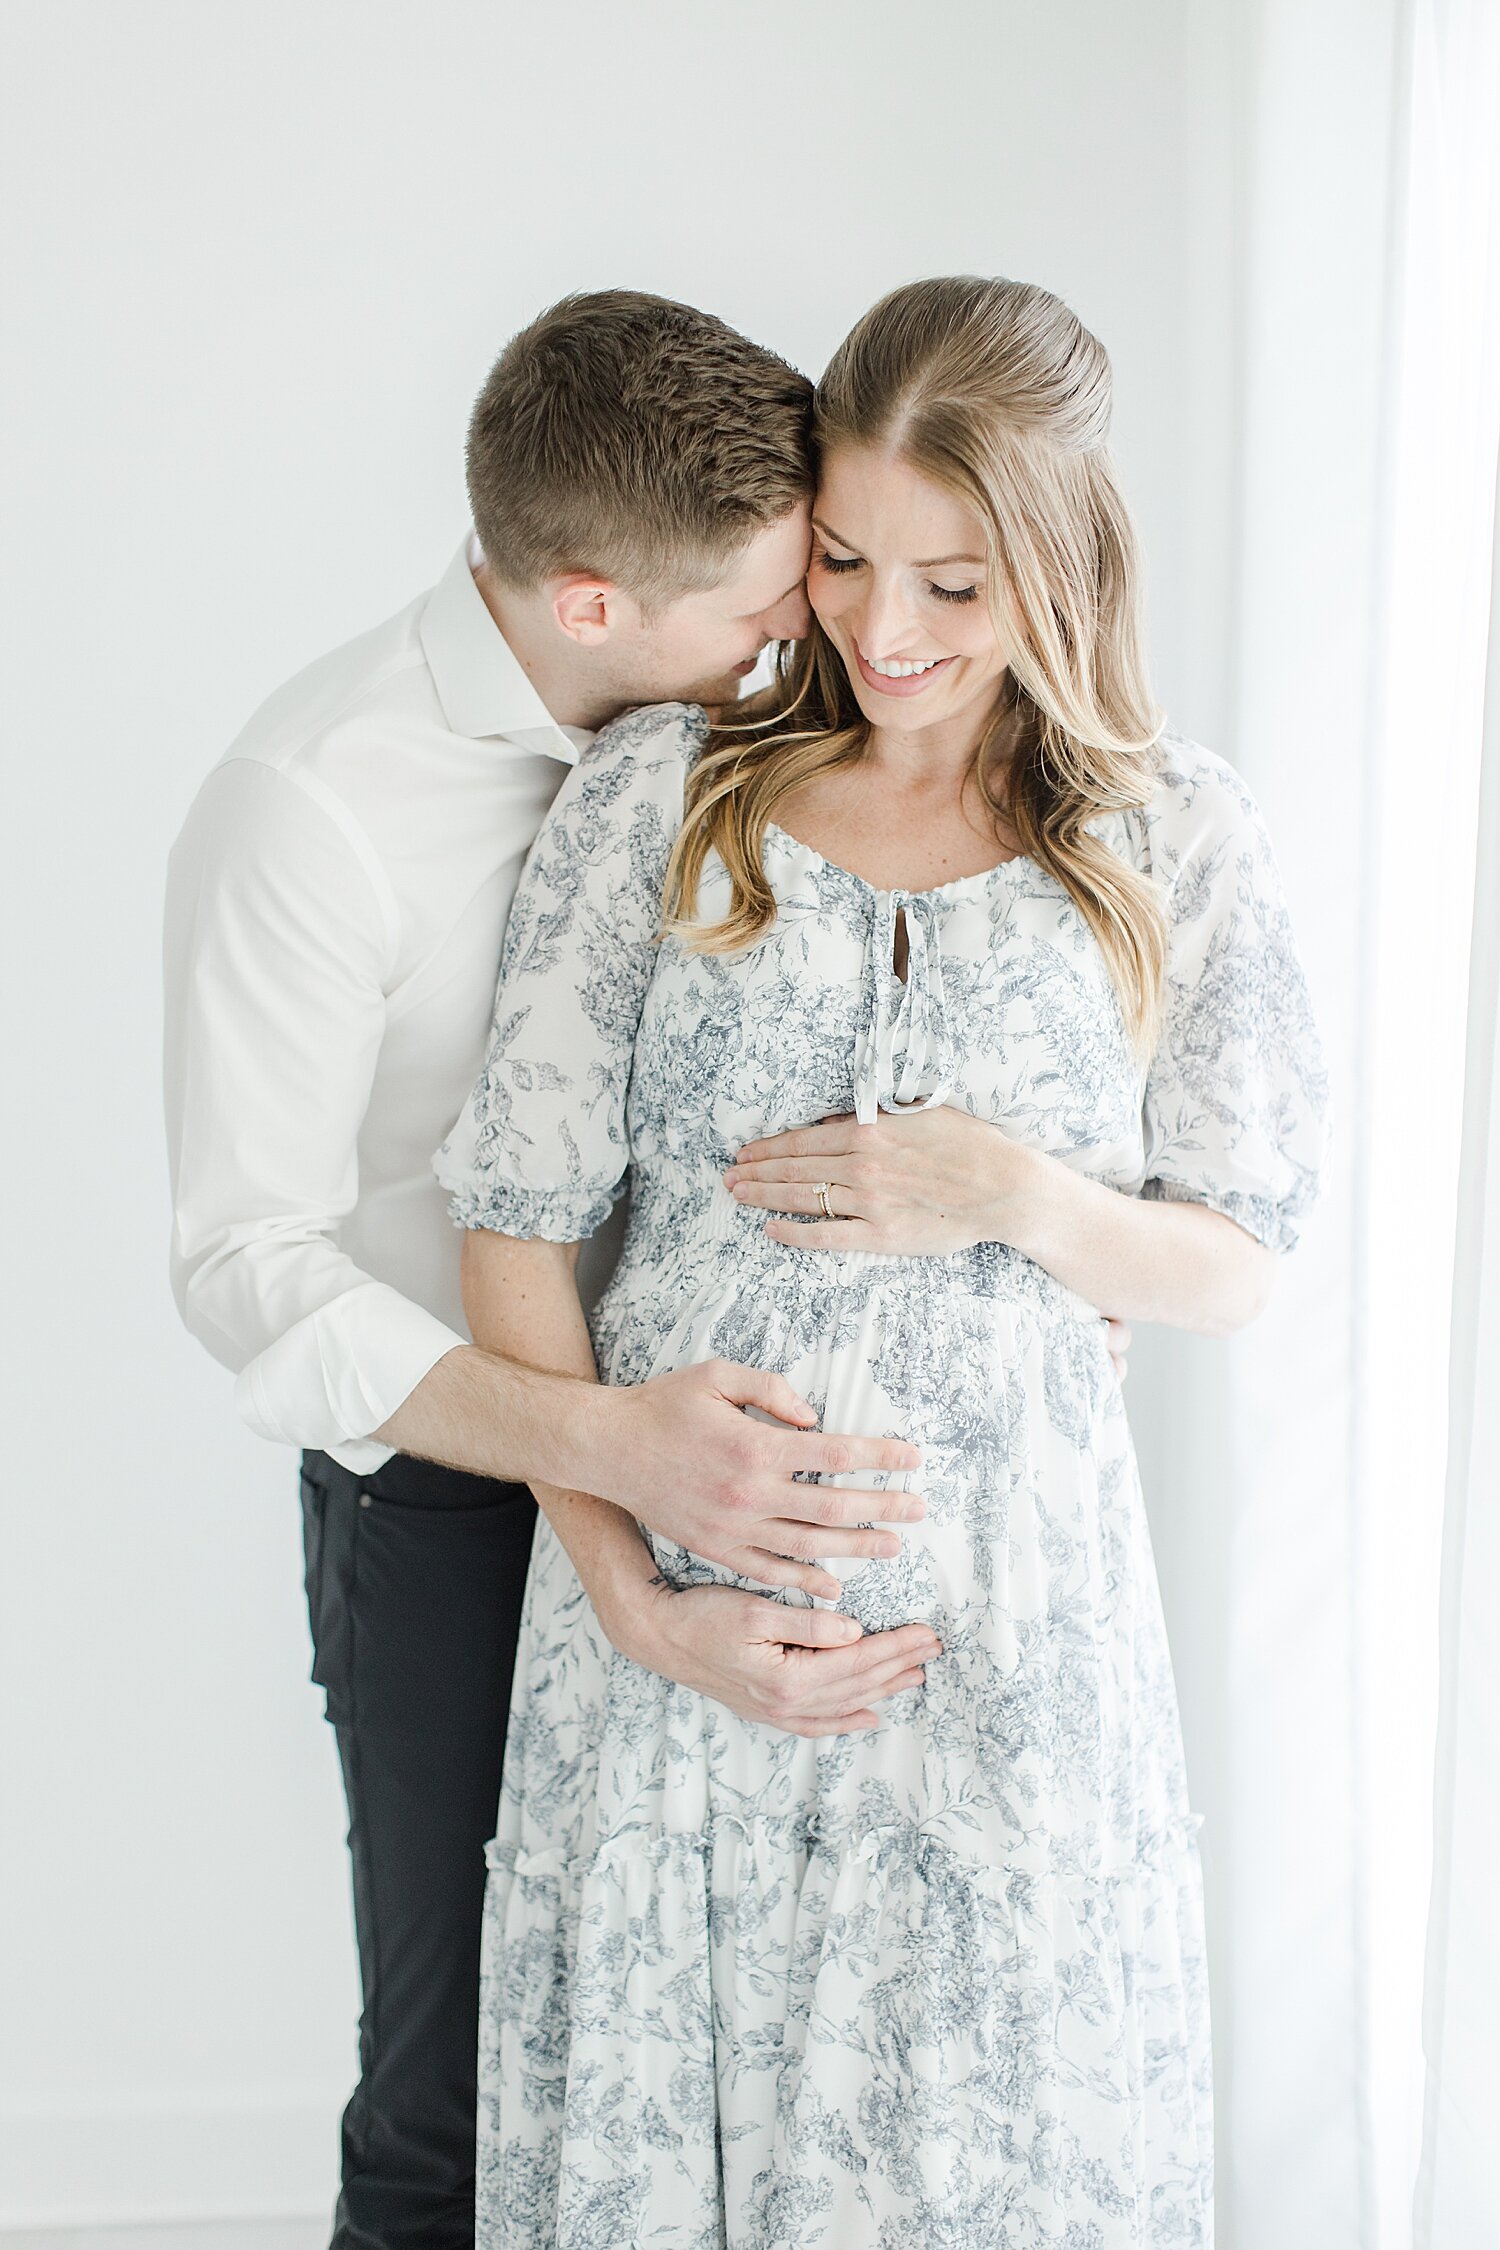 Sweet moment between Mom and Dad for maternity photos with Kristin Wood Photography.